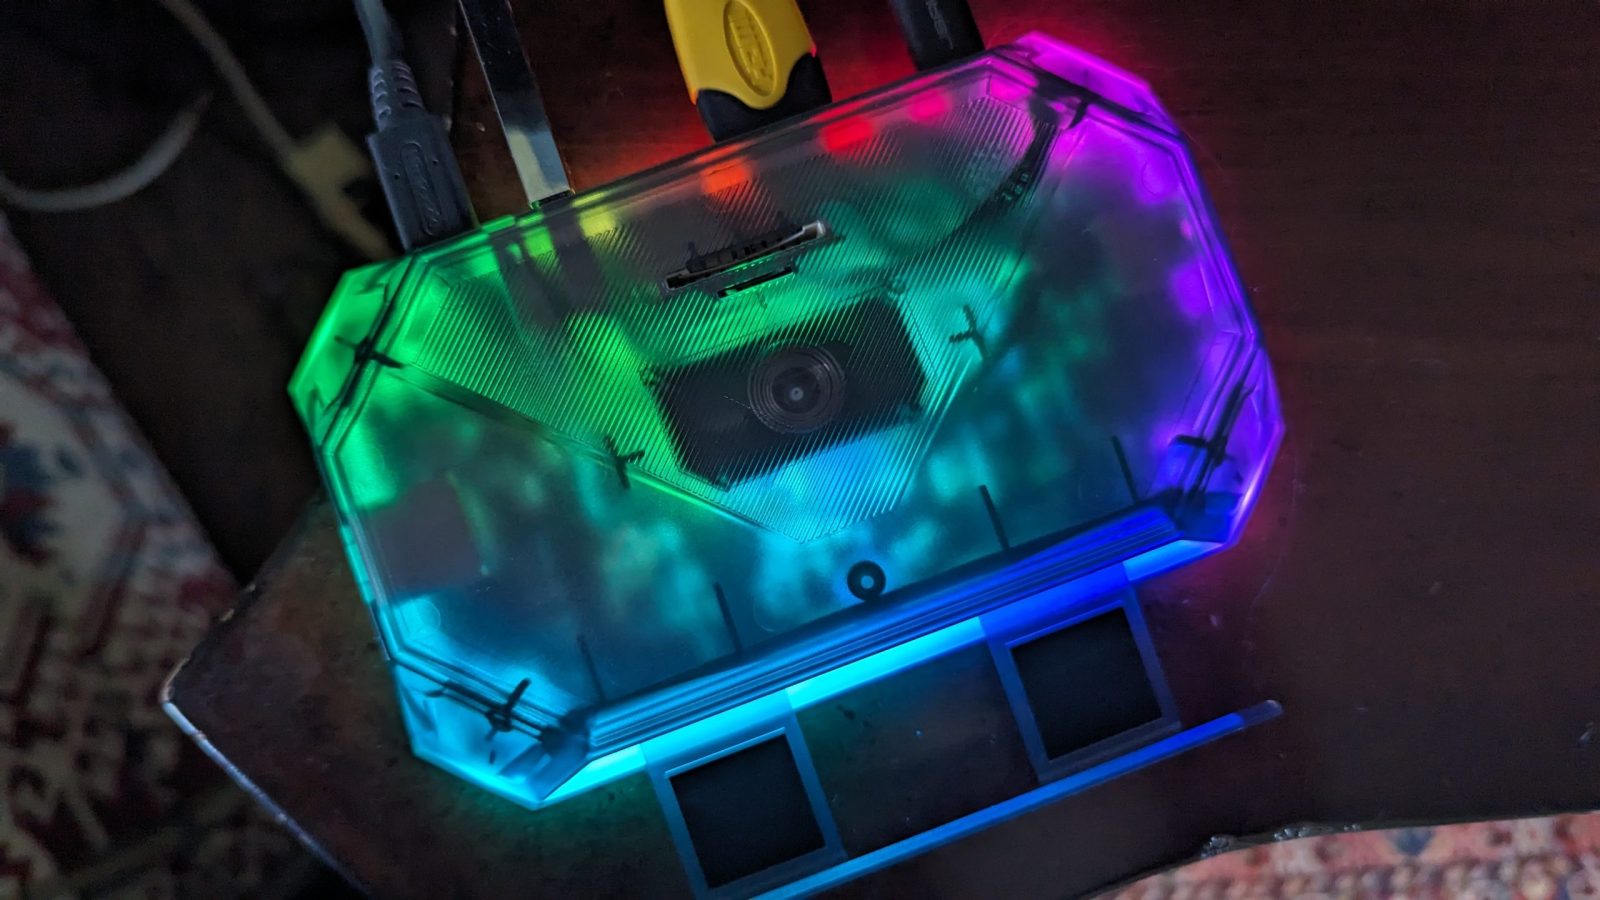 JSAUX's Steam Deck RGB Docking Station is now available for purchase